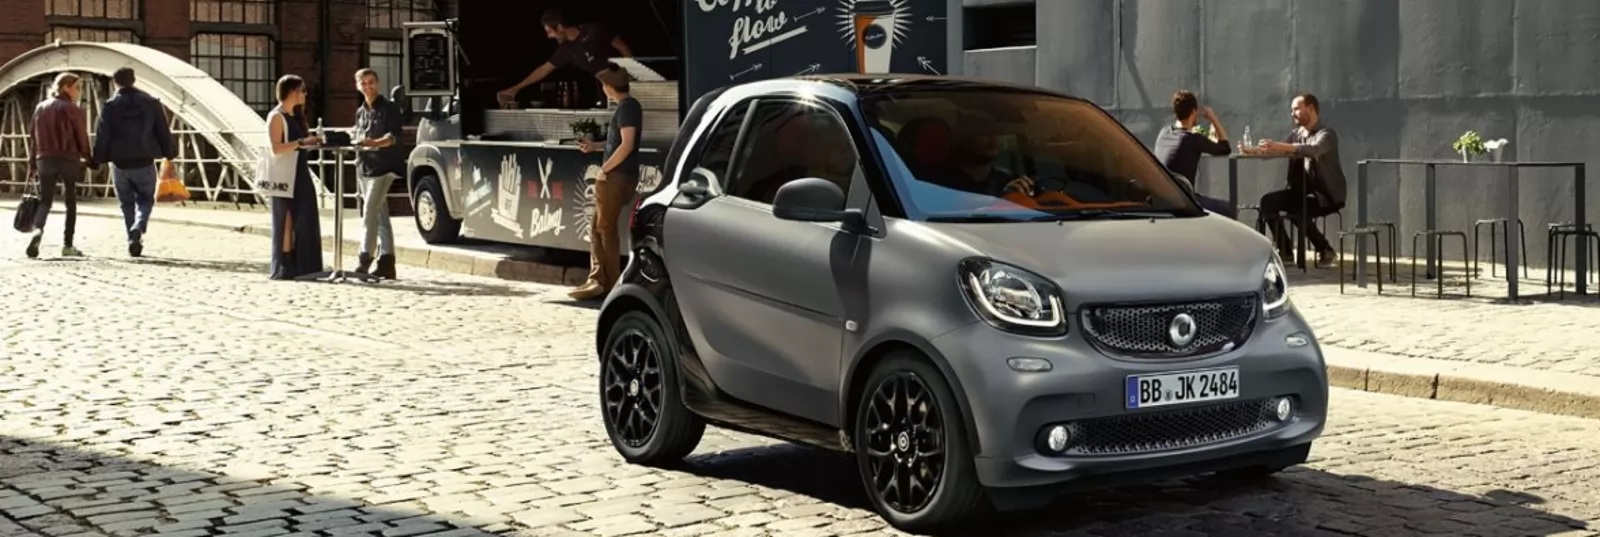 Lateral smart fortwo